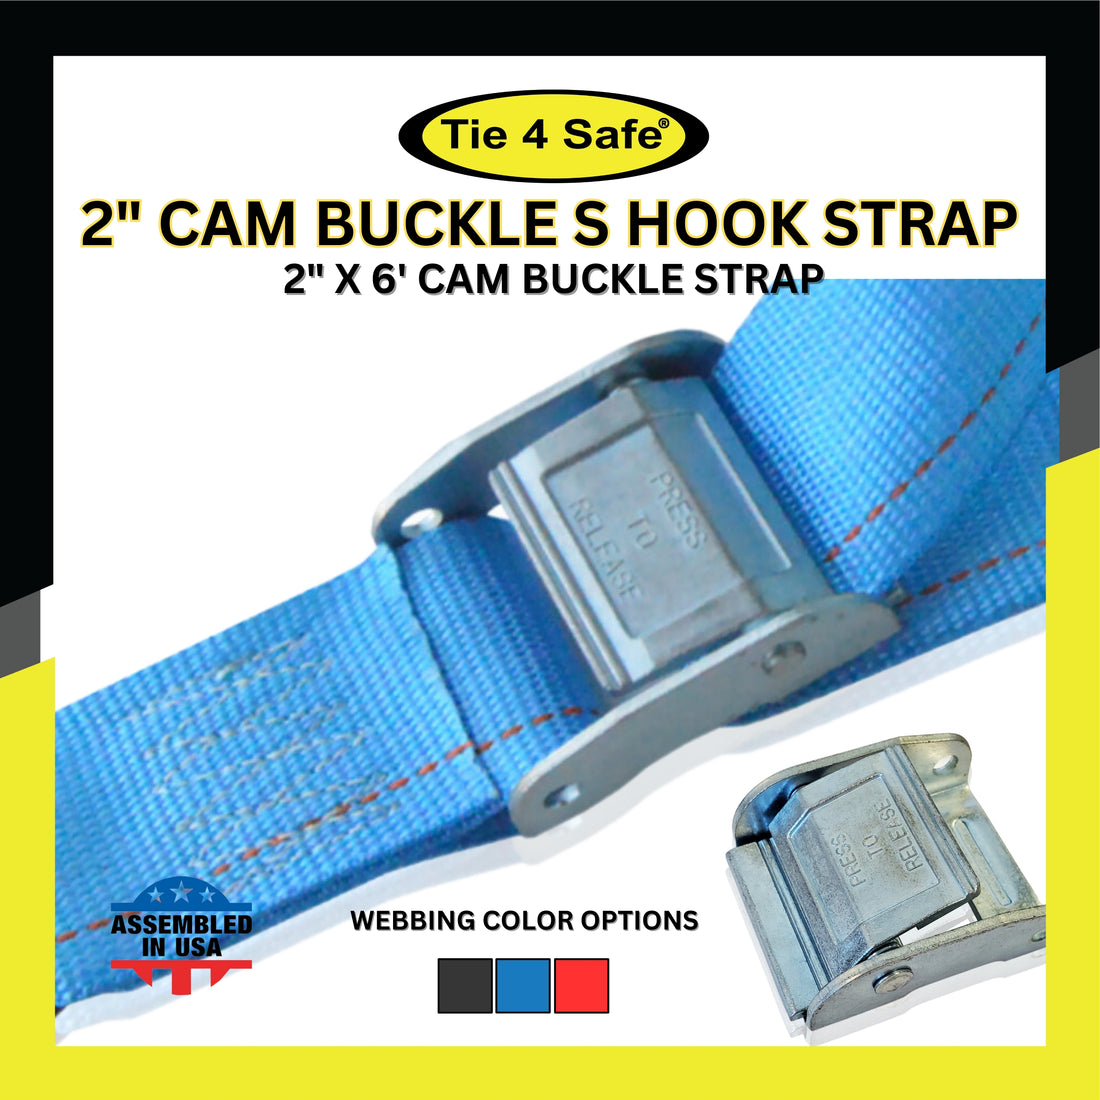 2" X 6' Cam Buckle Strap With S Fully Coated S Hooks